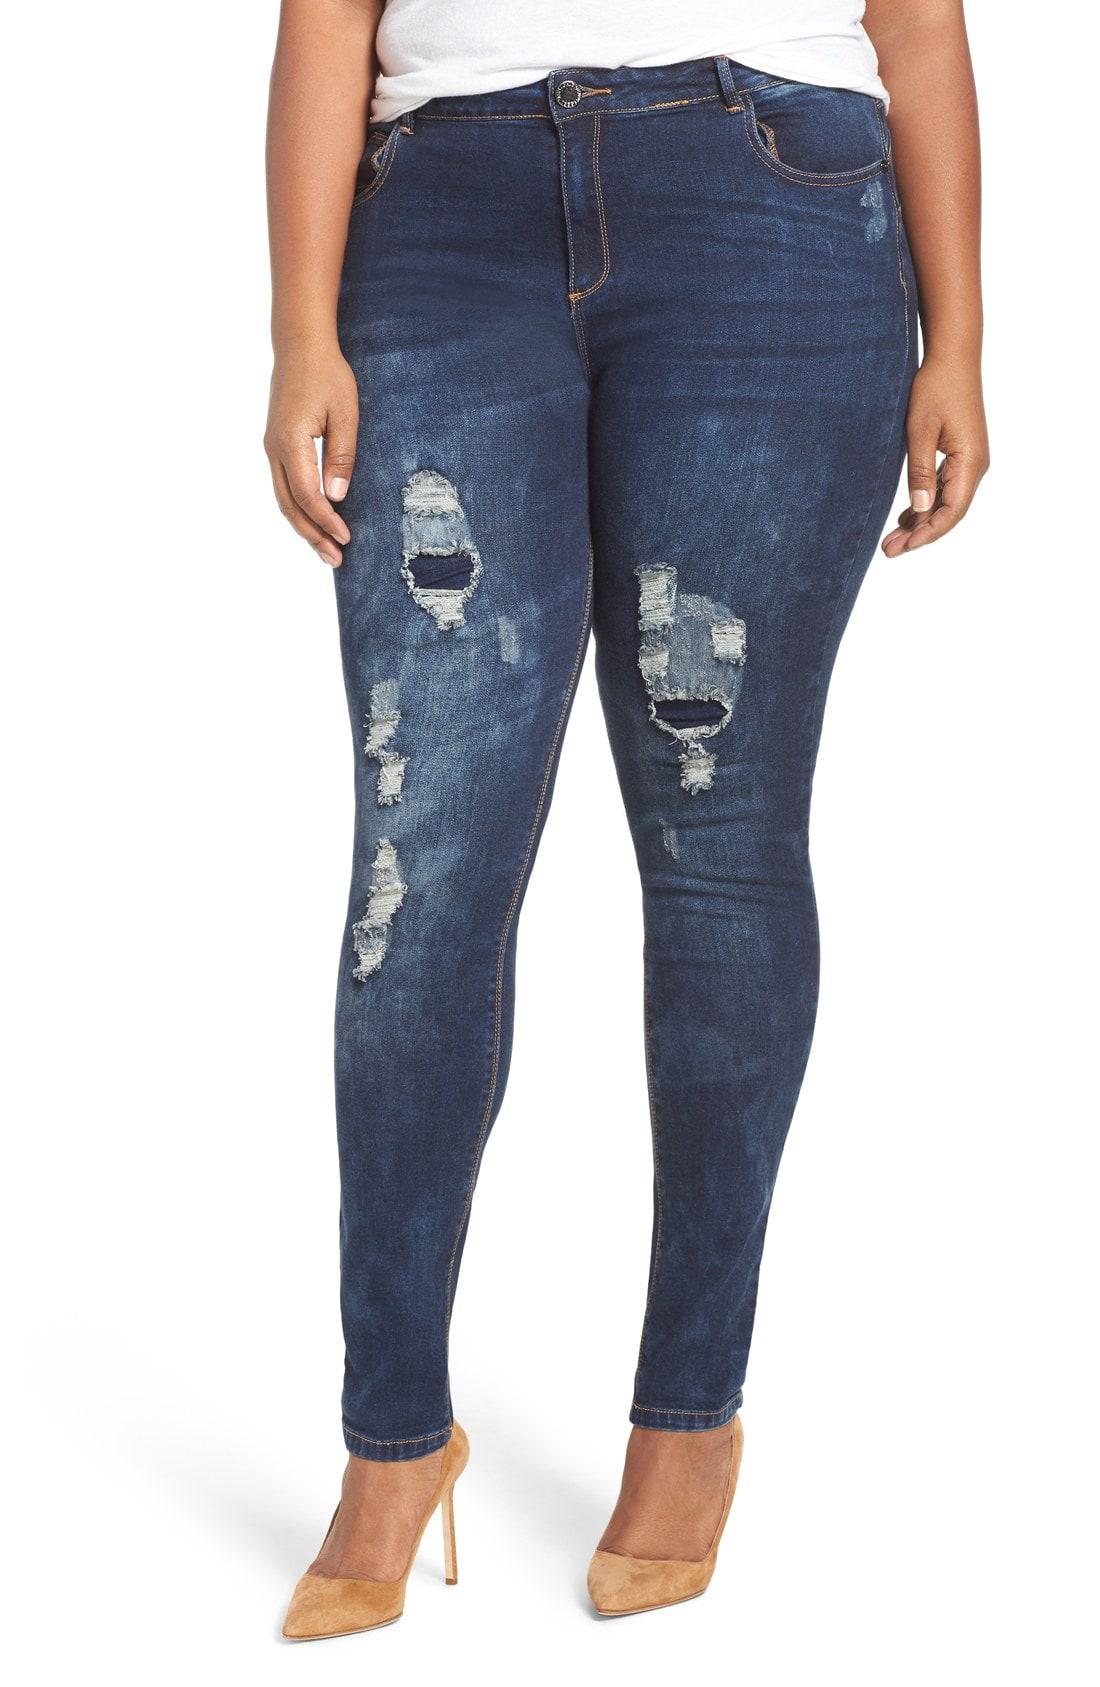 City Chic Denim 'dismantle' High Rise Ripped Stretch Skinny Jeans in ...